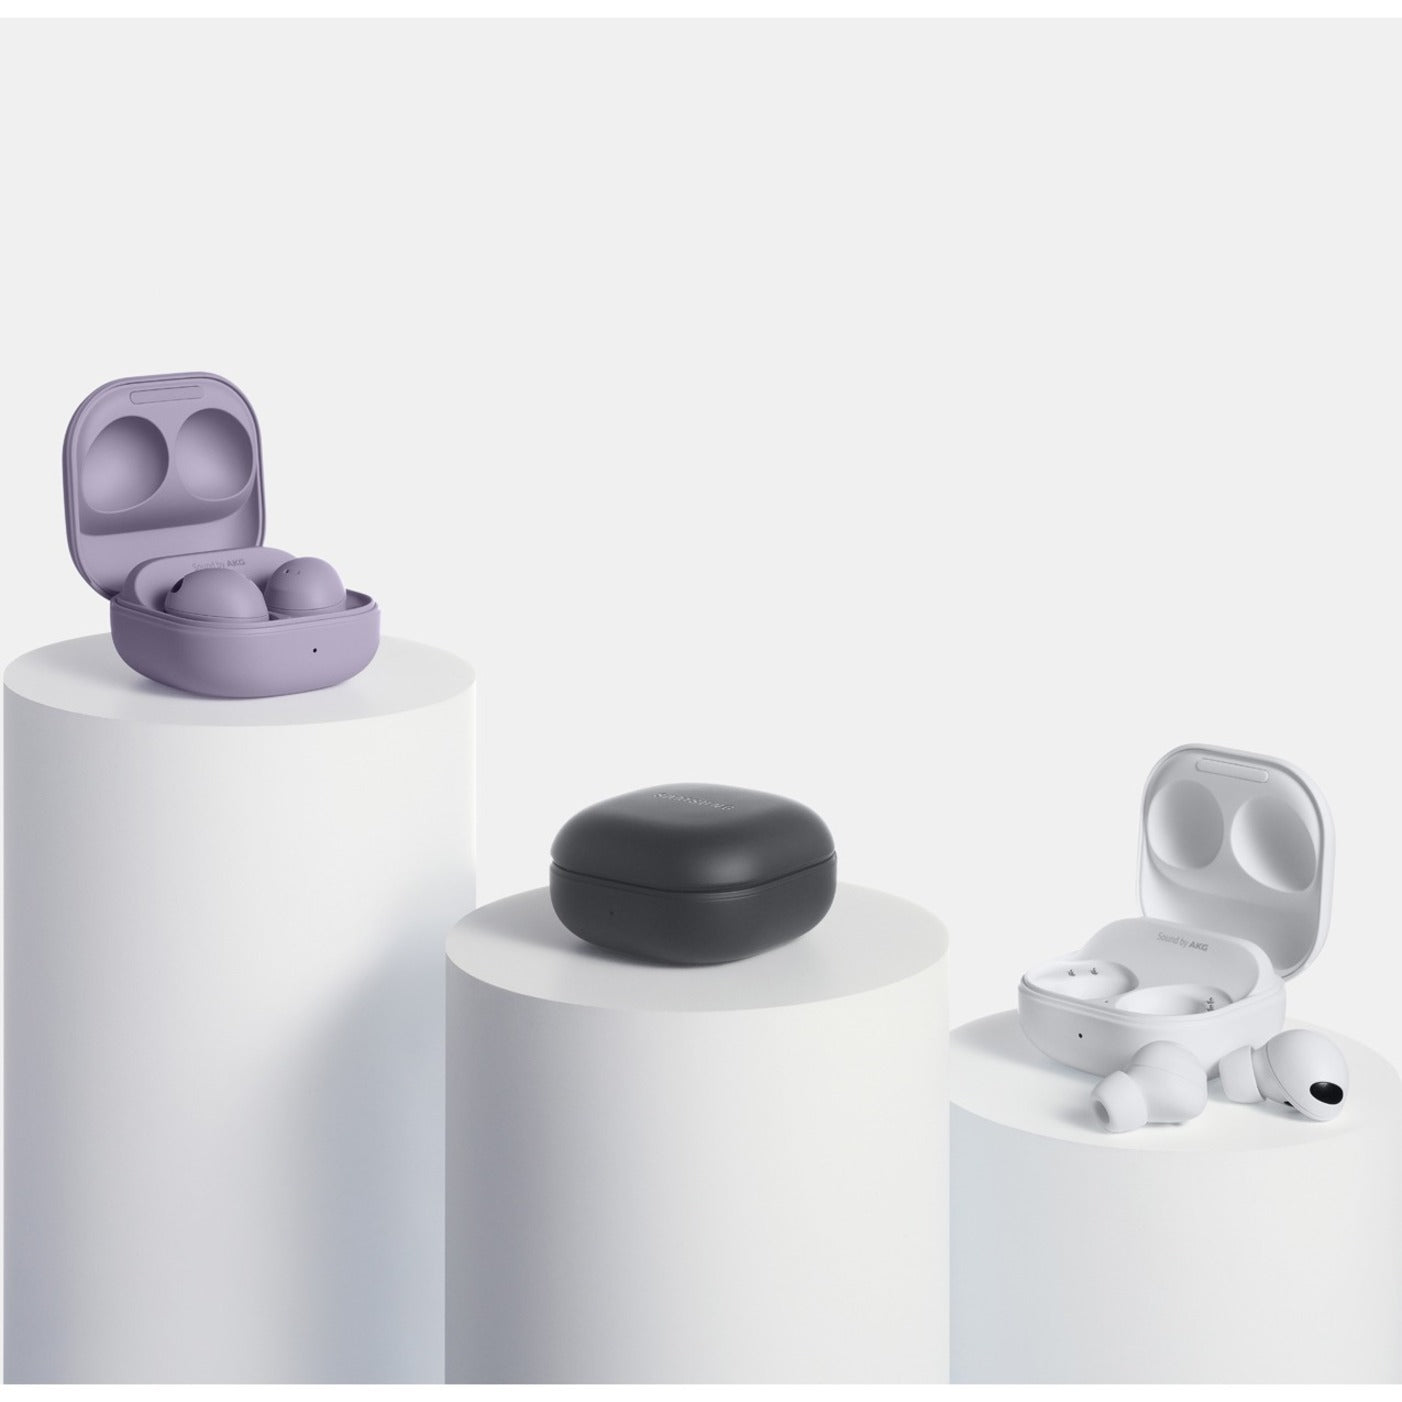 Samsung SM-R510NLVAXAR Galaxy Buds2 Pro, Bora Purple - True Wireless Earset with Active Noise Canceling